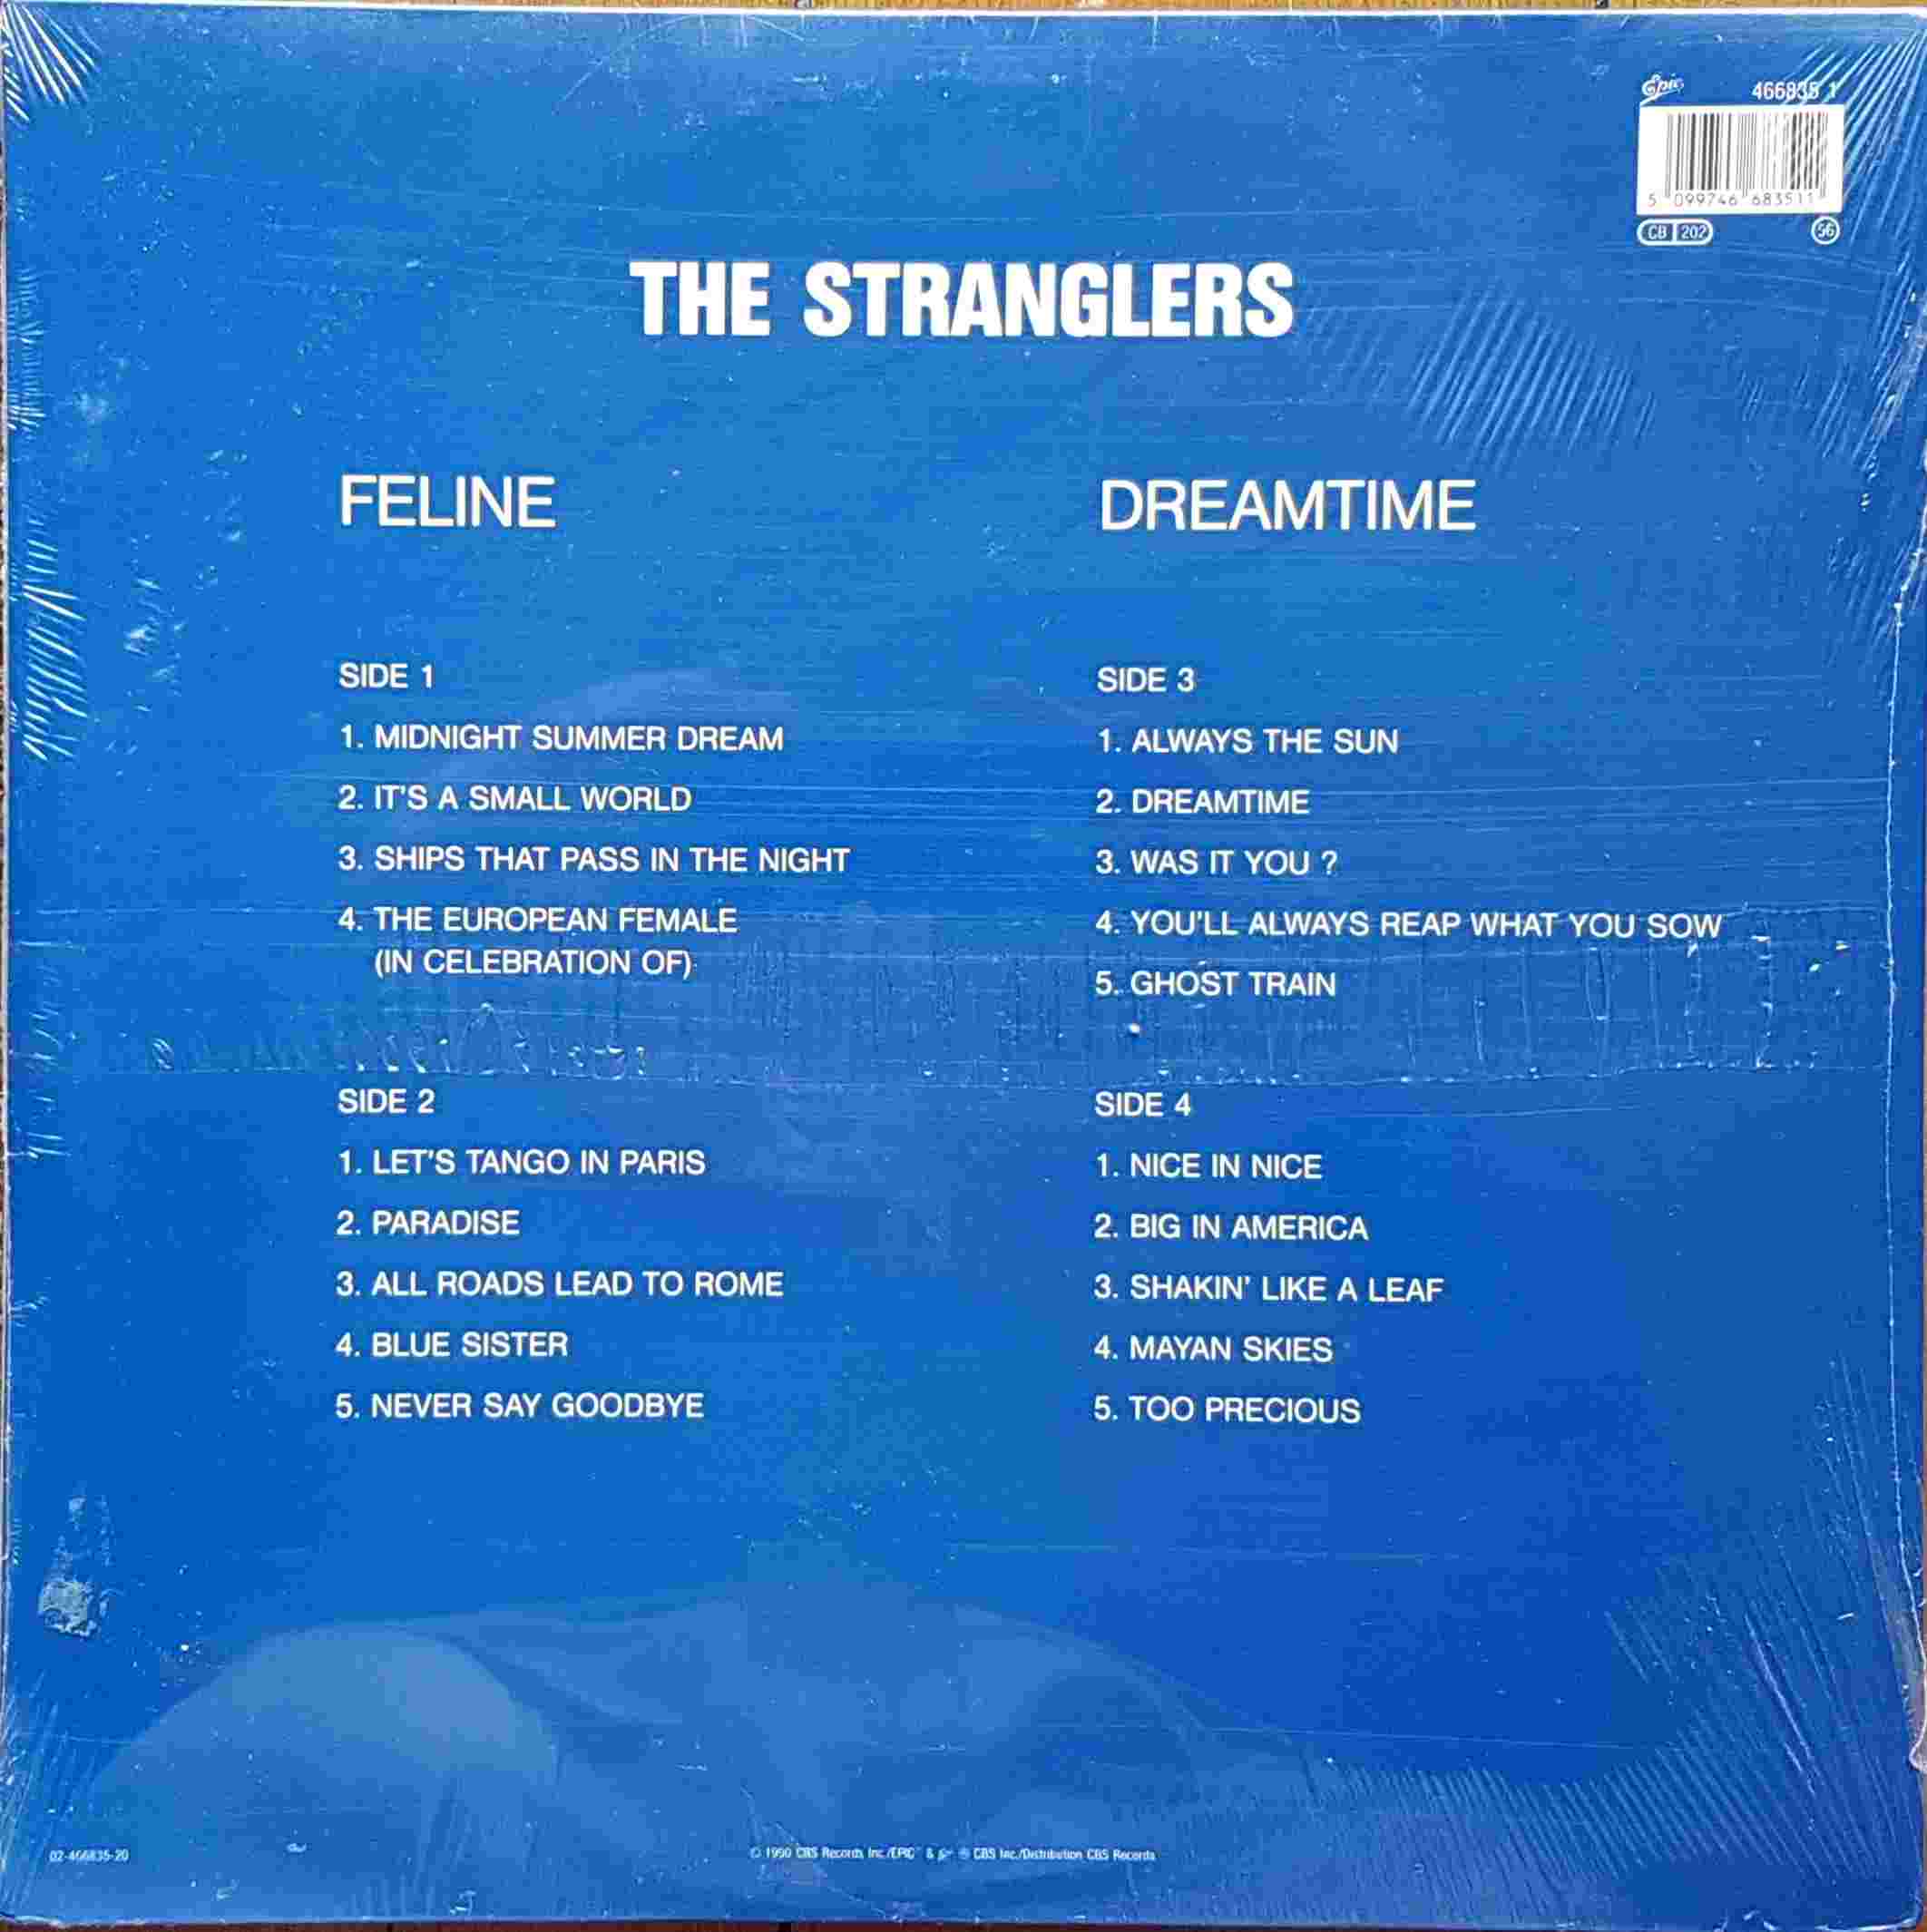 Picture of 466835 1 Feline / Dreamtime by artist The Stranglers  from The Stranglers